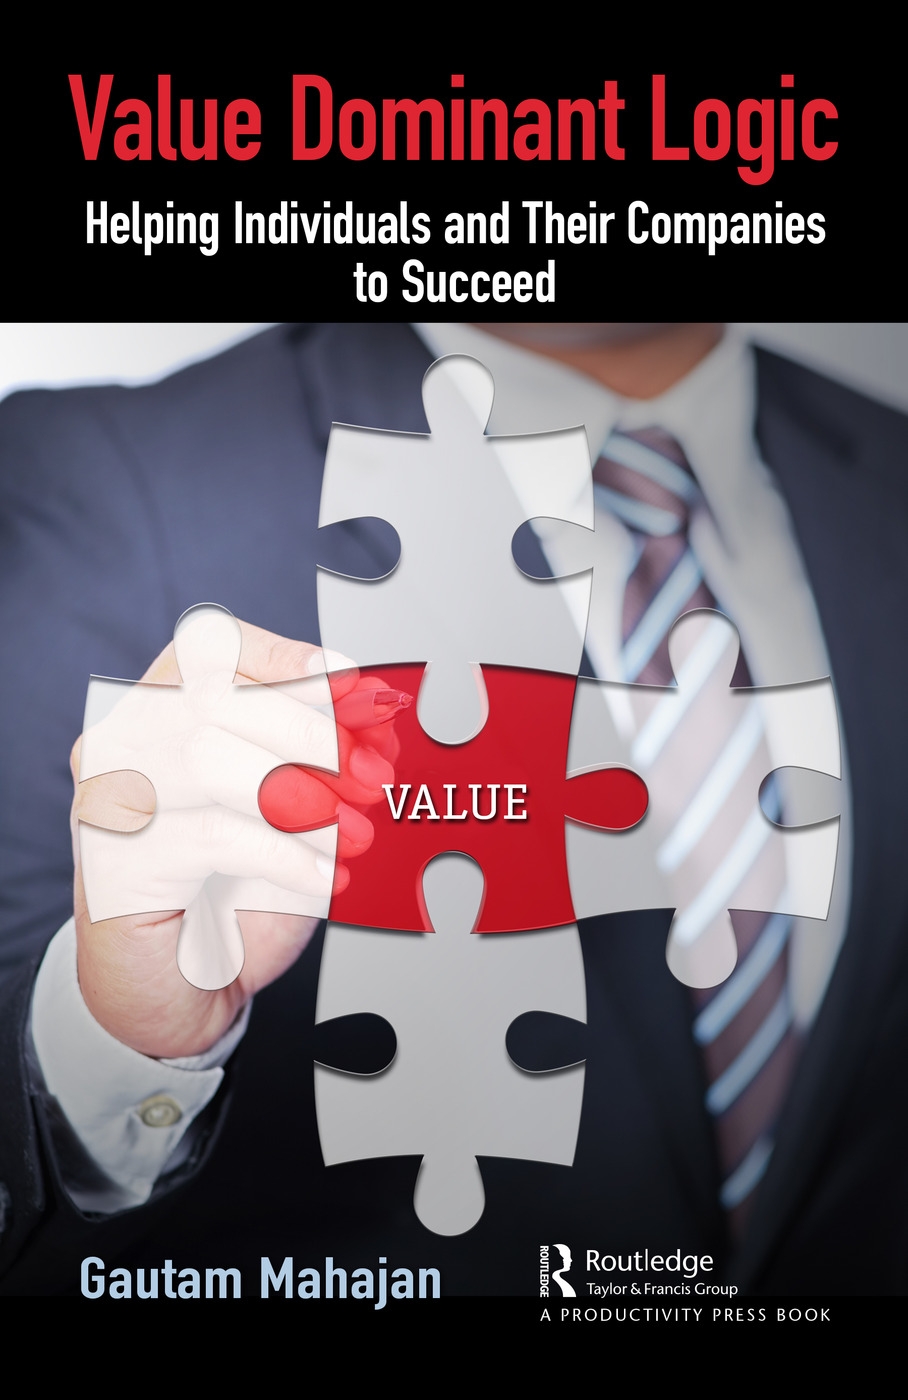 Value Dominant Logic: Helping Individuals and Their Companies to Succeed